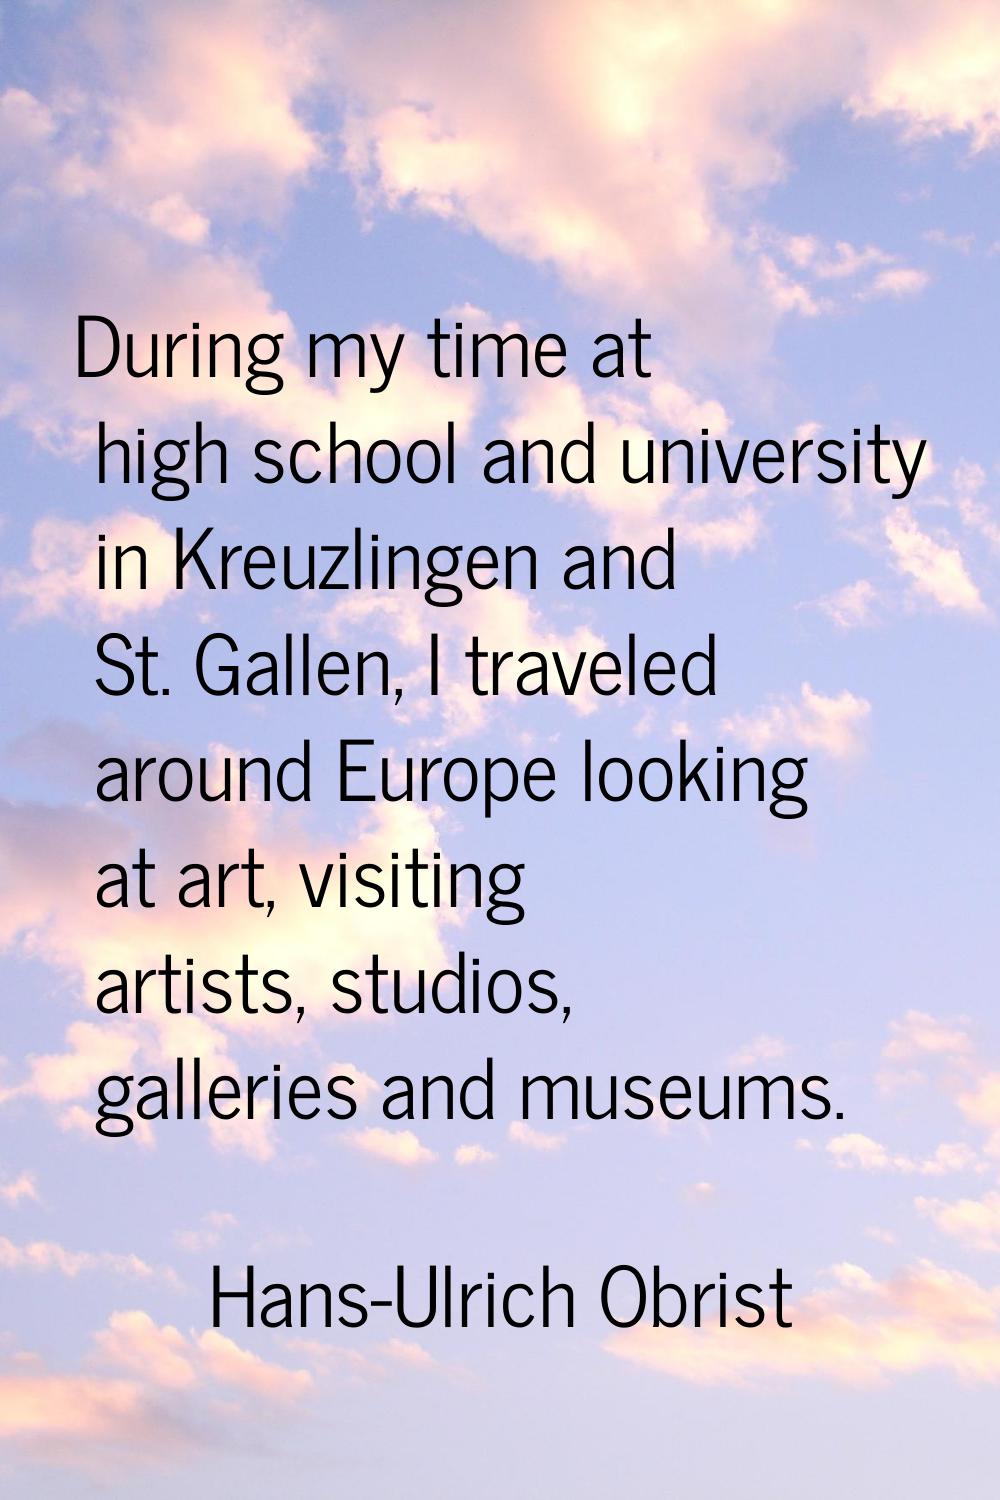 During my time at high school and university in Kreuzlingen and St. Gallen, I traveled around Europ